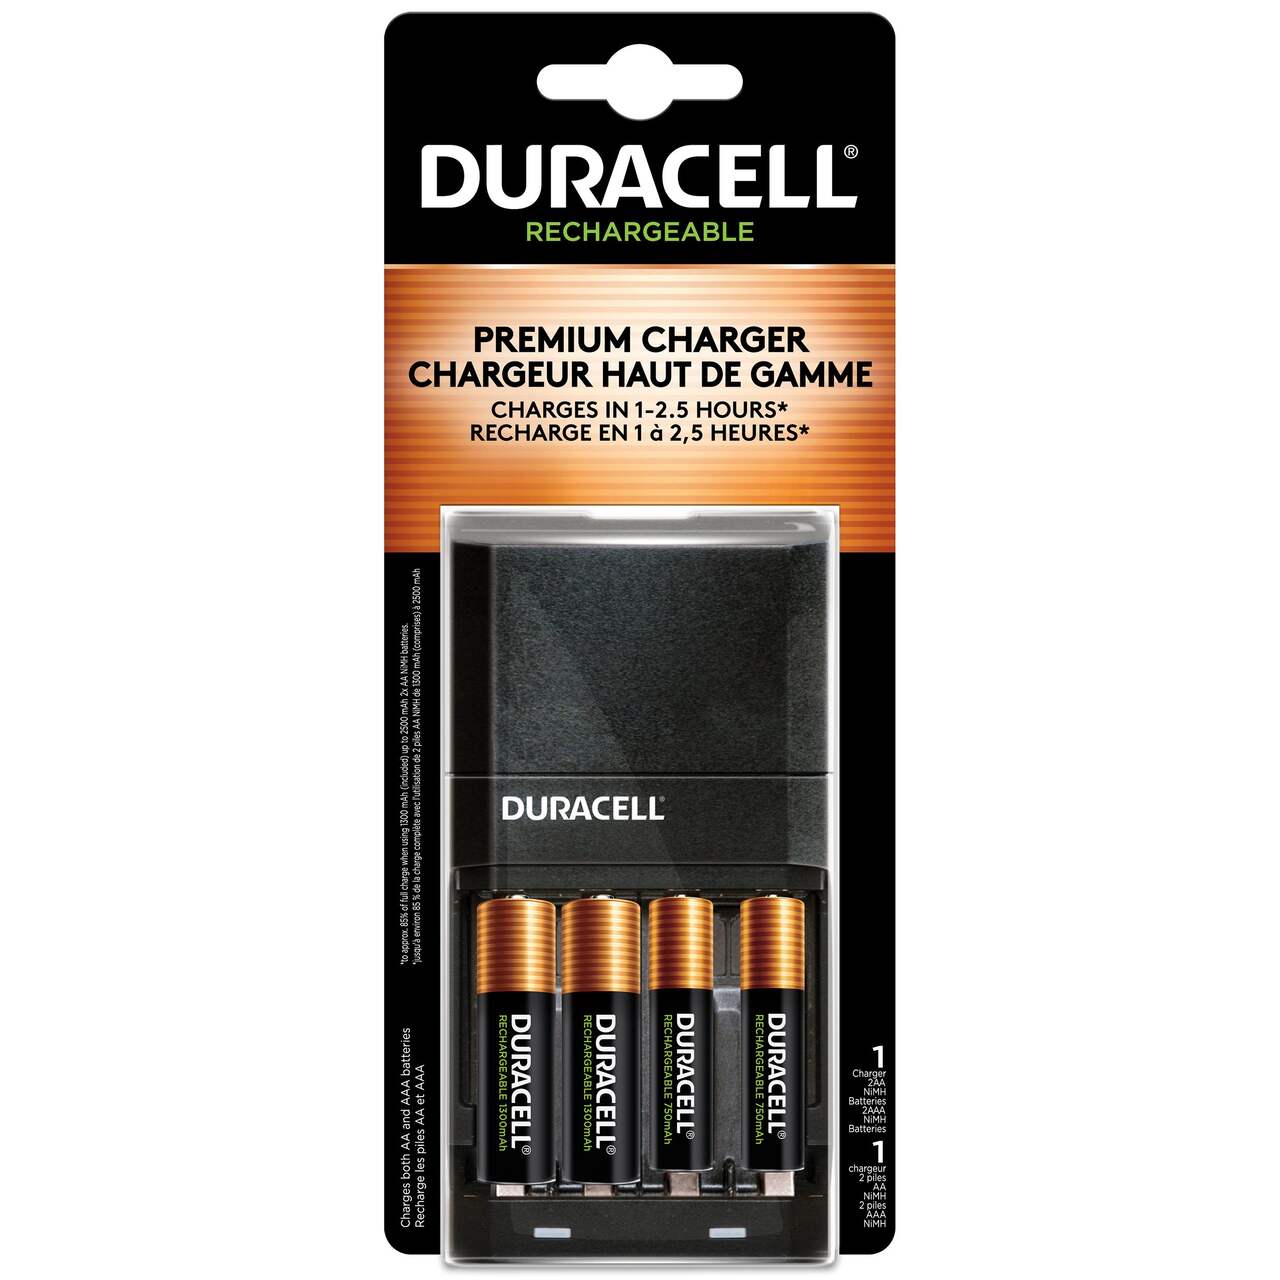 https://media-www.canadiantire.ca/product/fixing/hardware/household-batteries/0651534/duracell-chrg-4000-ion-w-2aa-2aaa-6538dc72-19f8-4c65-be7f-3c65a0dc8b4a-jpgrendition.jpg?imdensity=1&imwidth=640&impolicy=mZoom